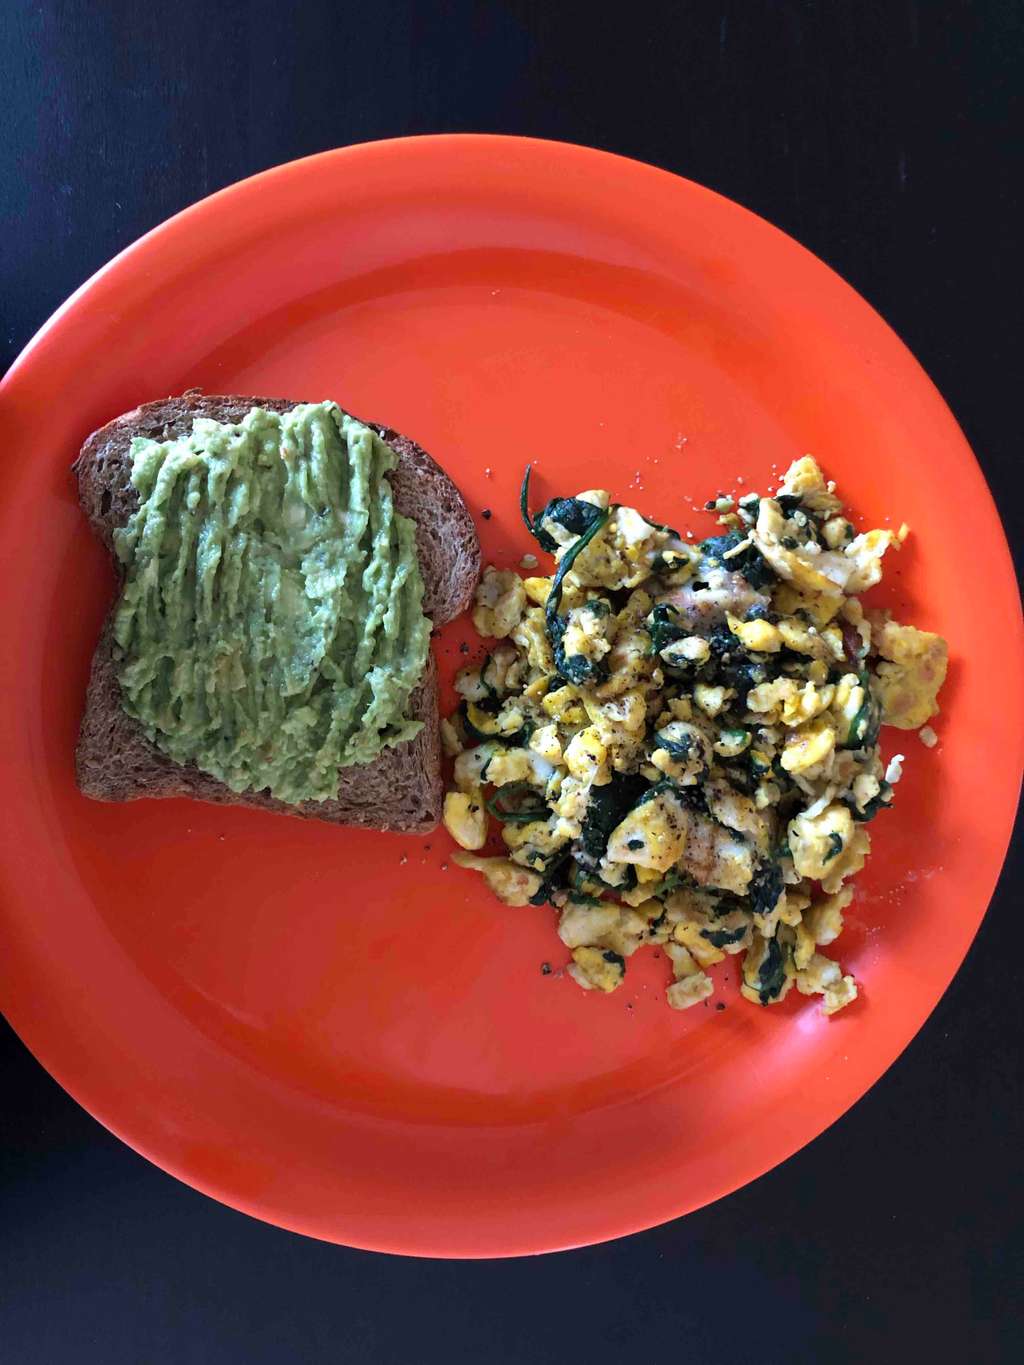 Scrambled eggs with Spinach + Avocado Toast